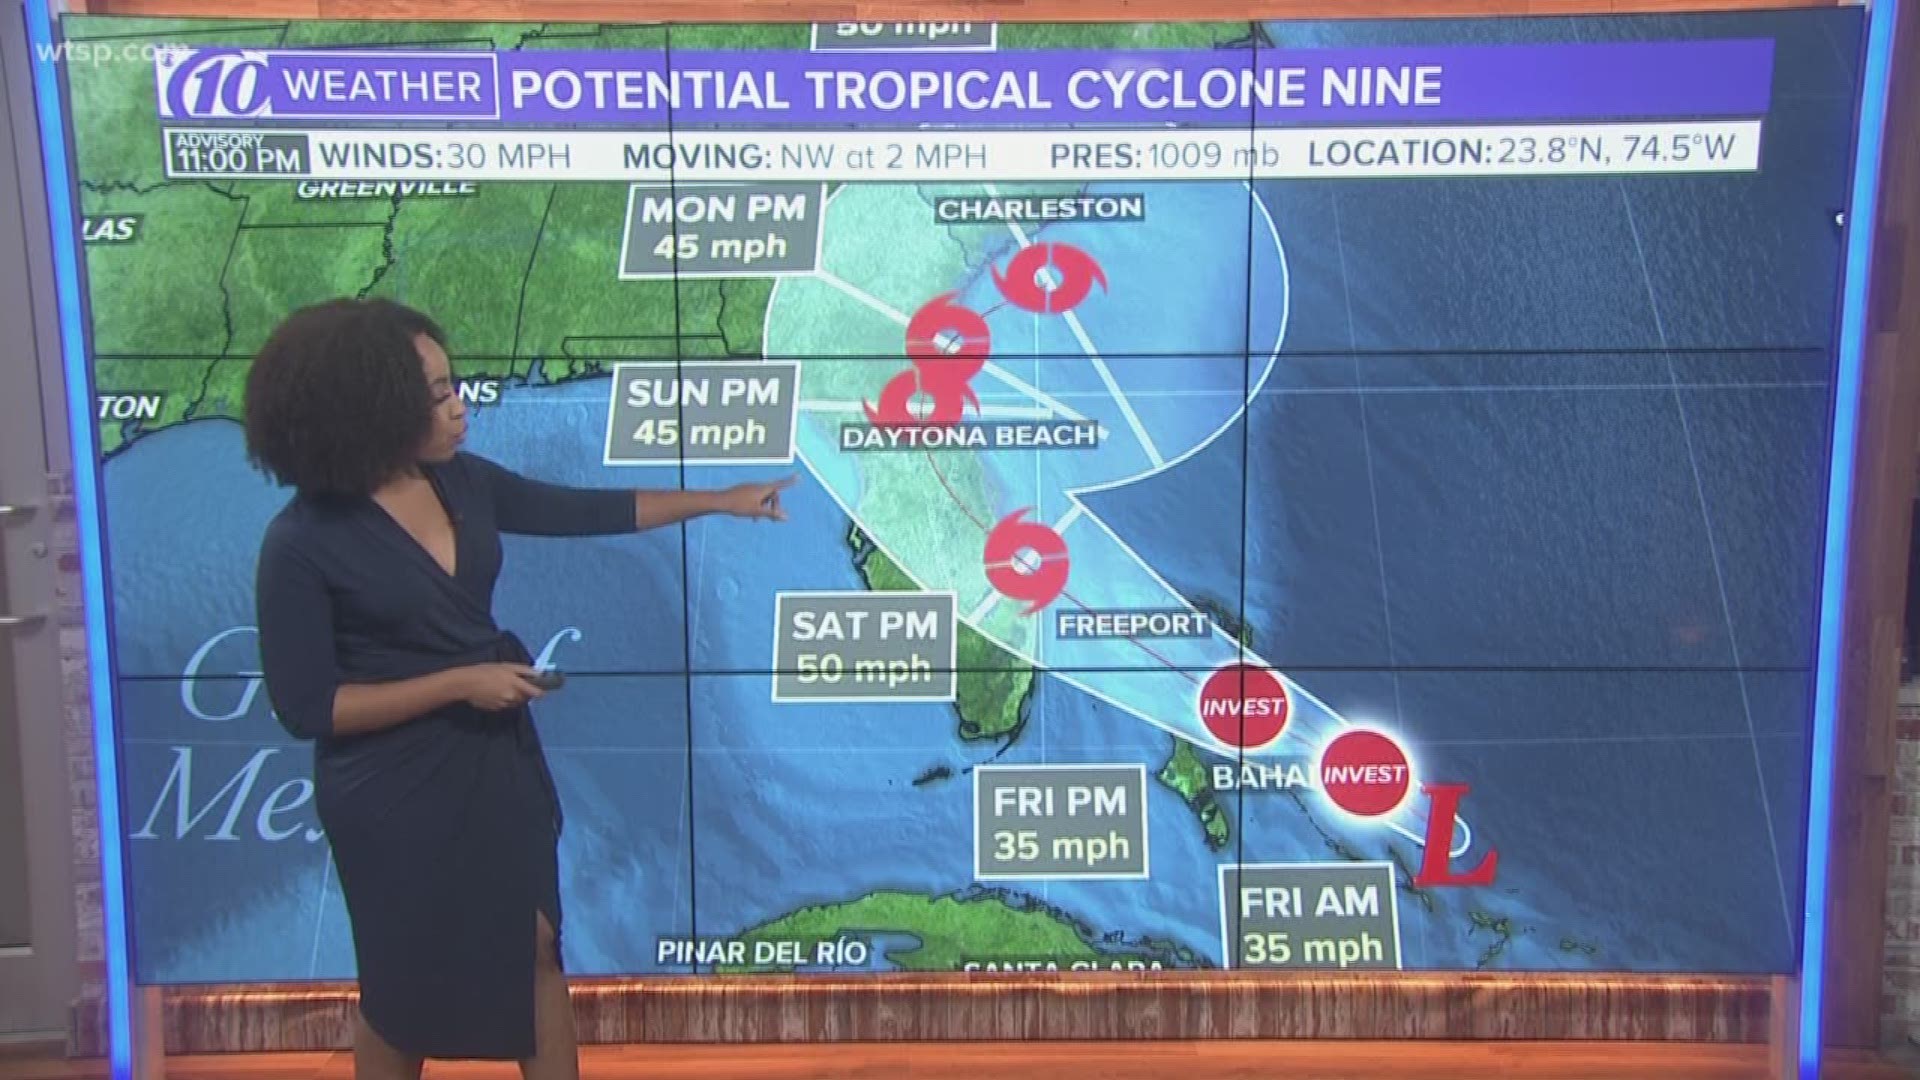 A potential tropical cyclone is taking aim at Florida and is forecast to dump heavy rain across parts of the state into the weekend.

Right now, Potential Tropical Cyclone 9 is over the Bahamas, but it's moving northwest and likely to develop into Tropical Storm Humberto soon.